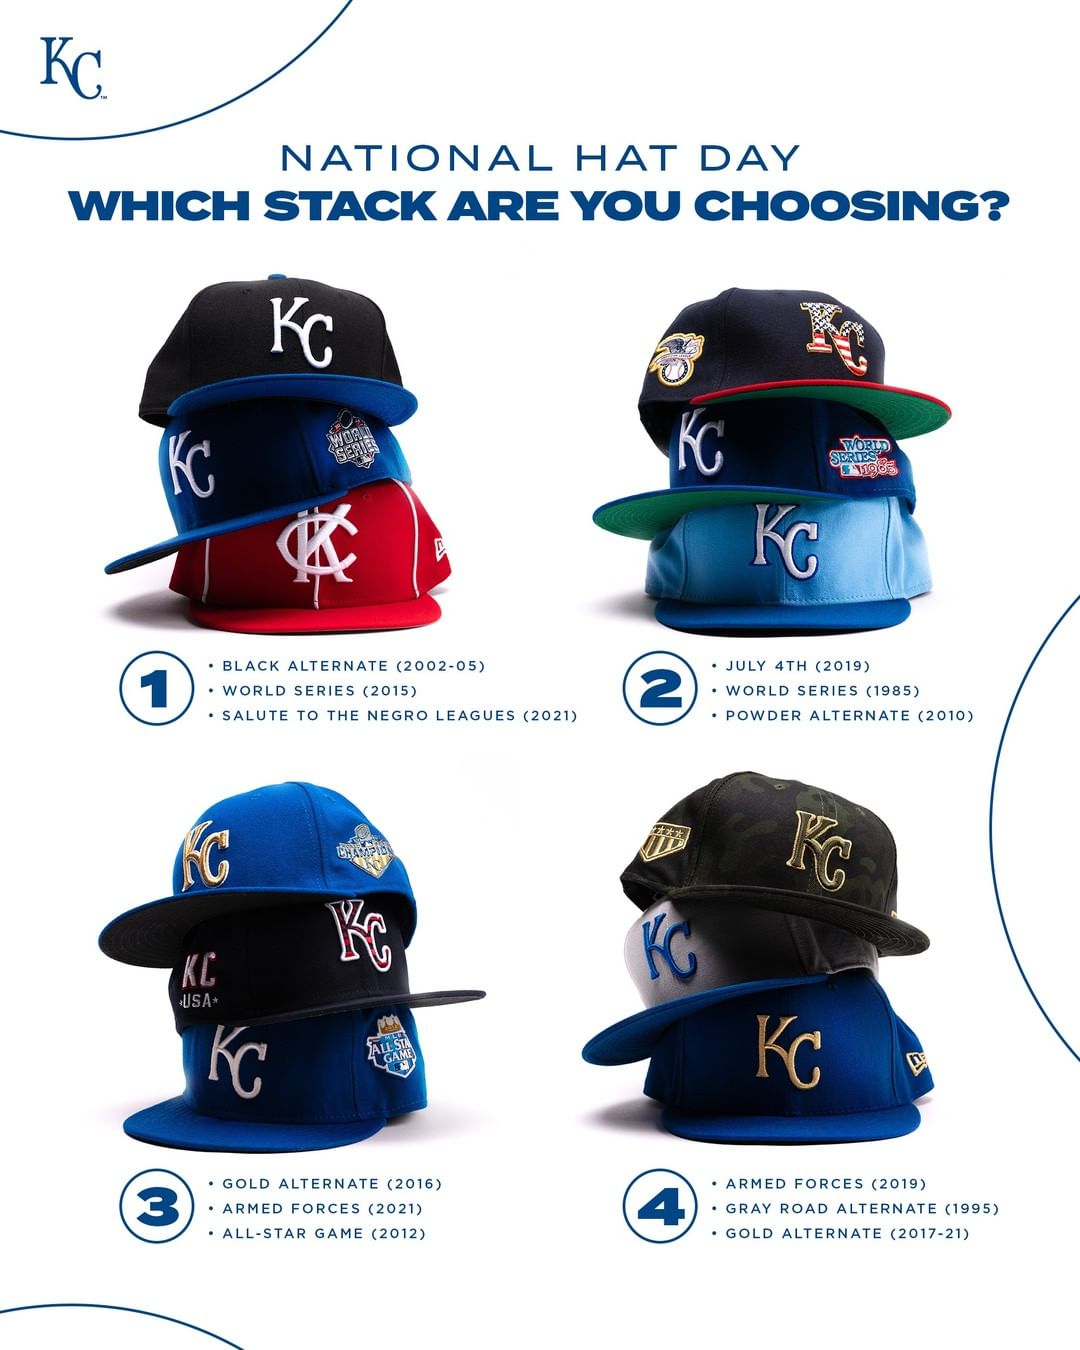 Add one collection to your closet. #NationalHatDay...